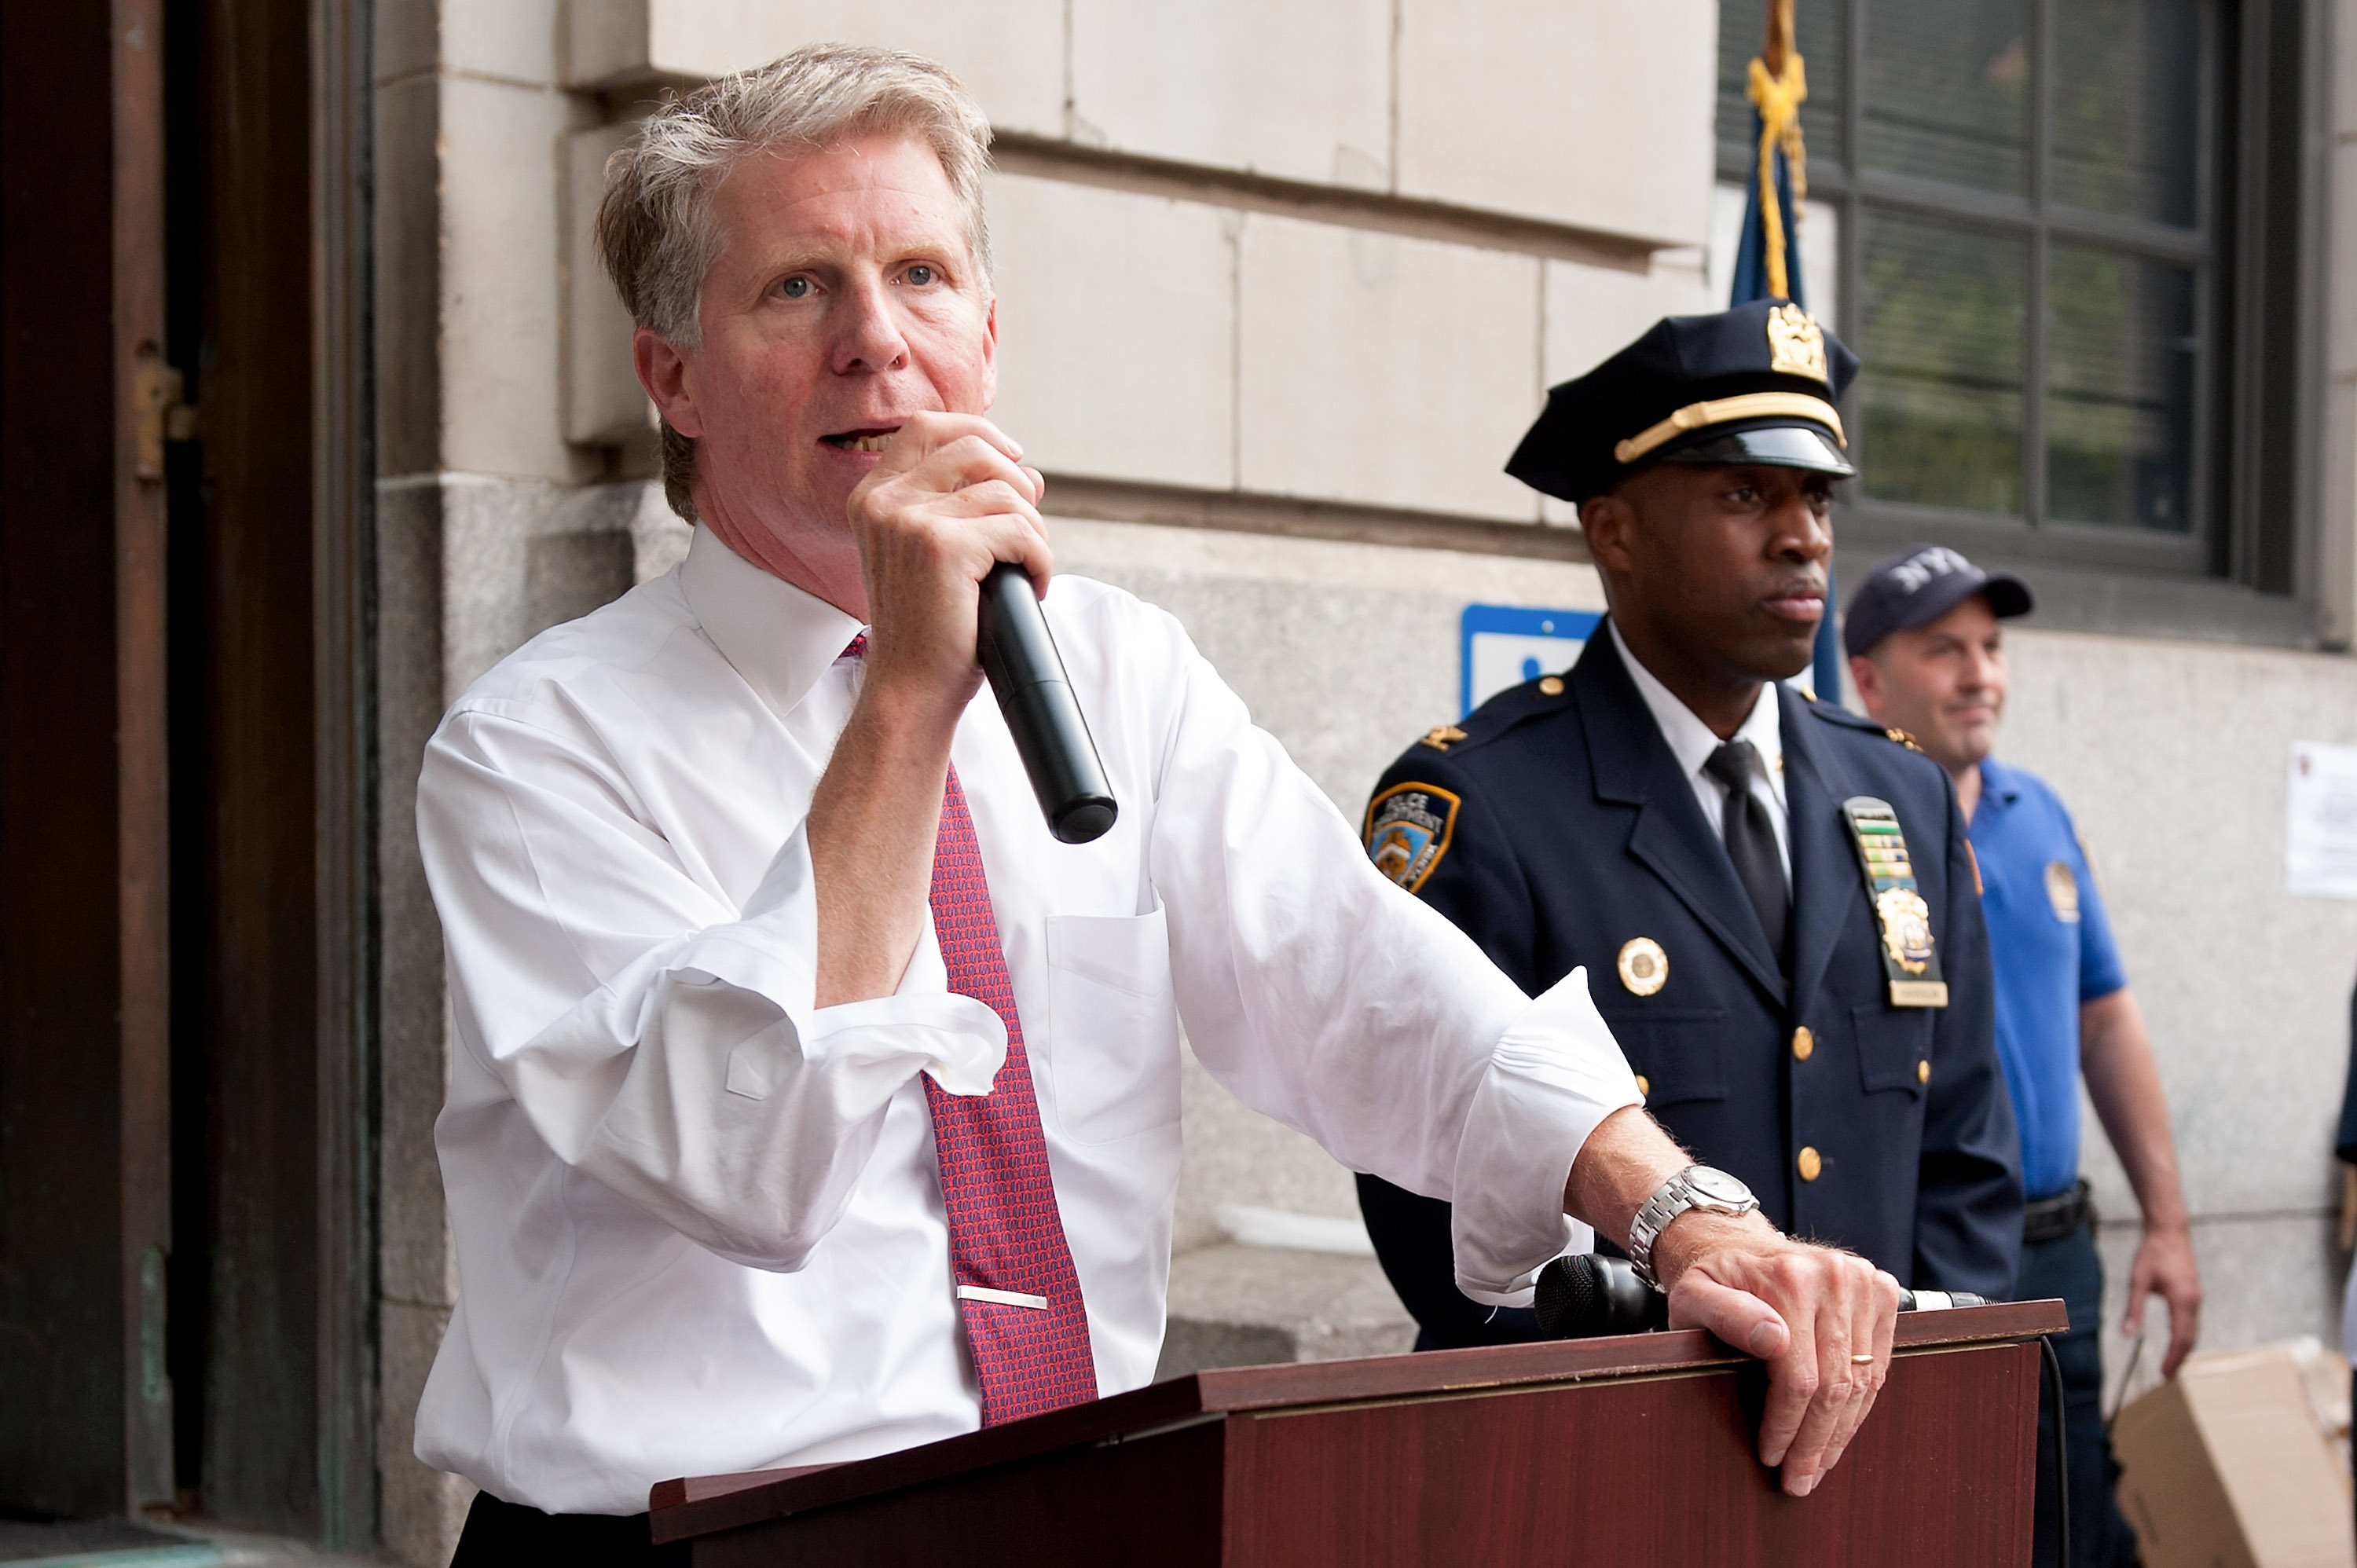 Manhattan District Attorney Cyrus R. Vance, Jr. attends National Night Out on the streets of Manhattan on August 7, 2012 in New York City. (D Dipasupil—Getty Images)